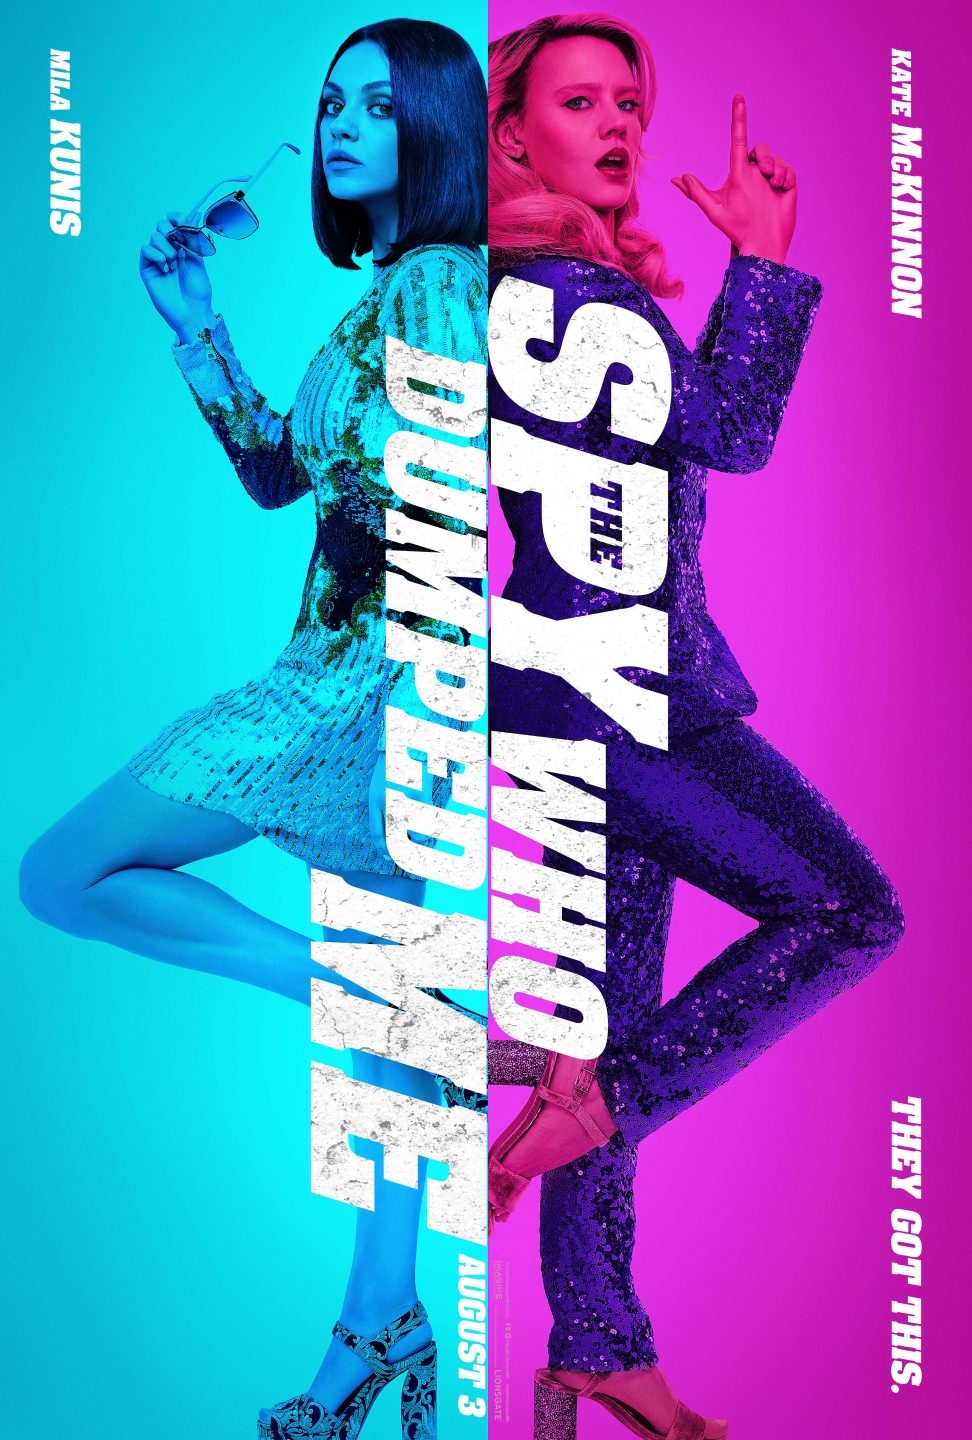 The Spy Who Dumped Me poster (Lionsgate)